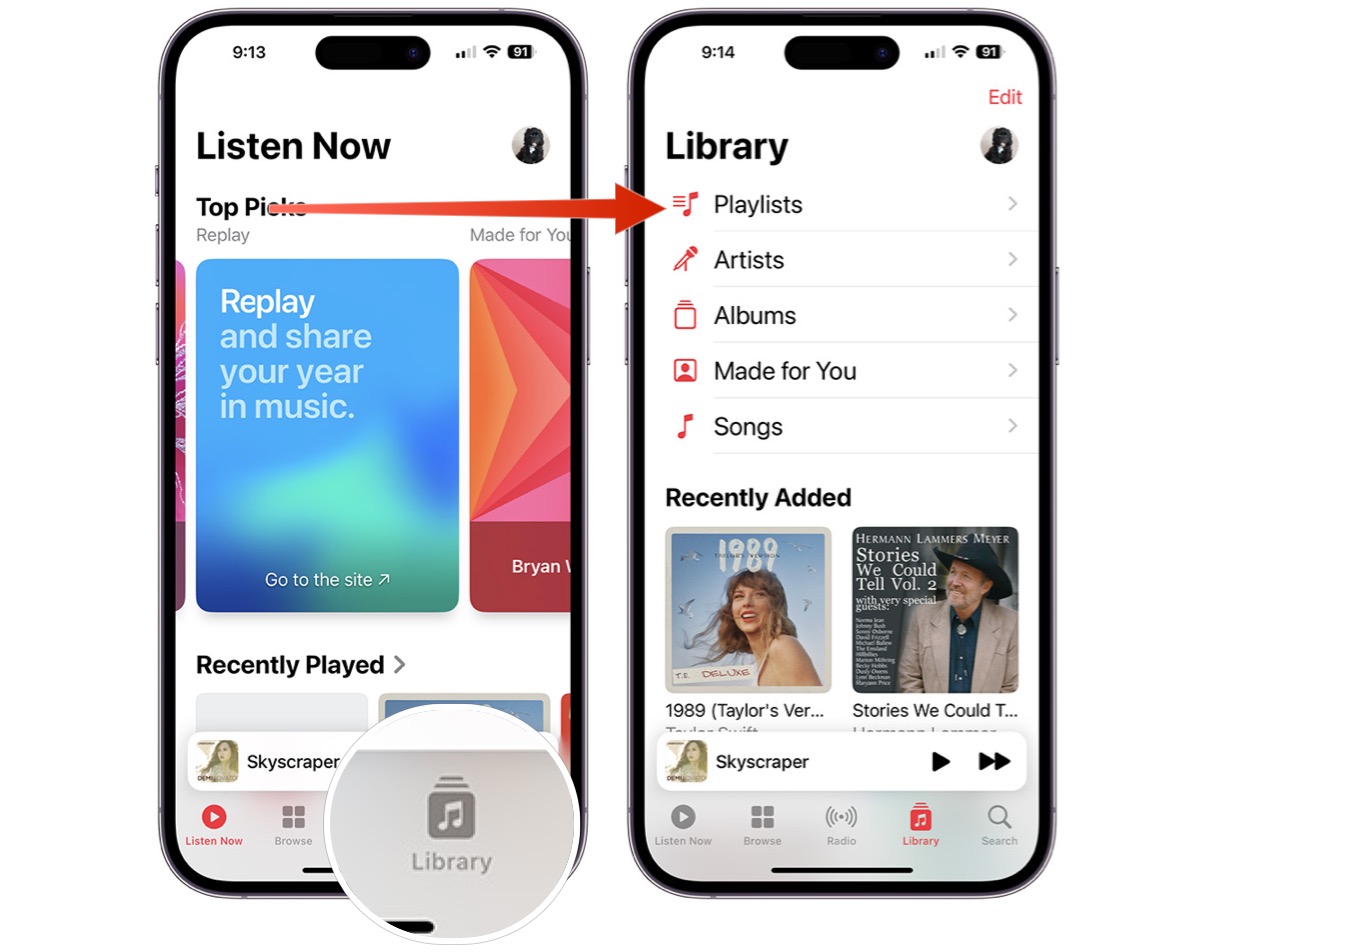 Screenshots showing how to find favorites in the Apple Music app.